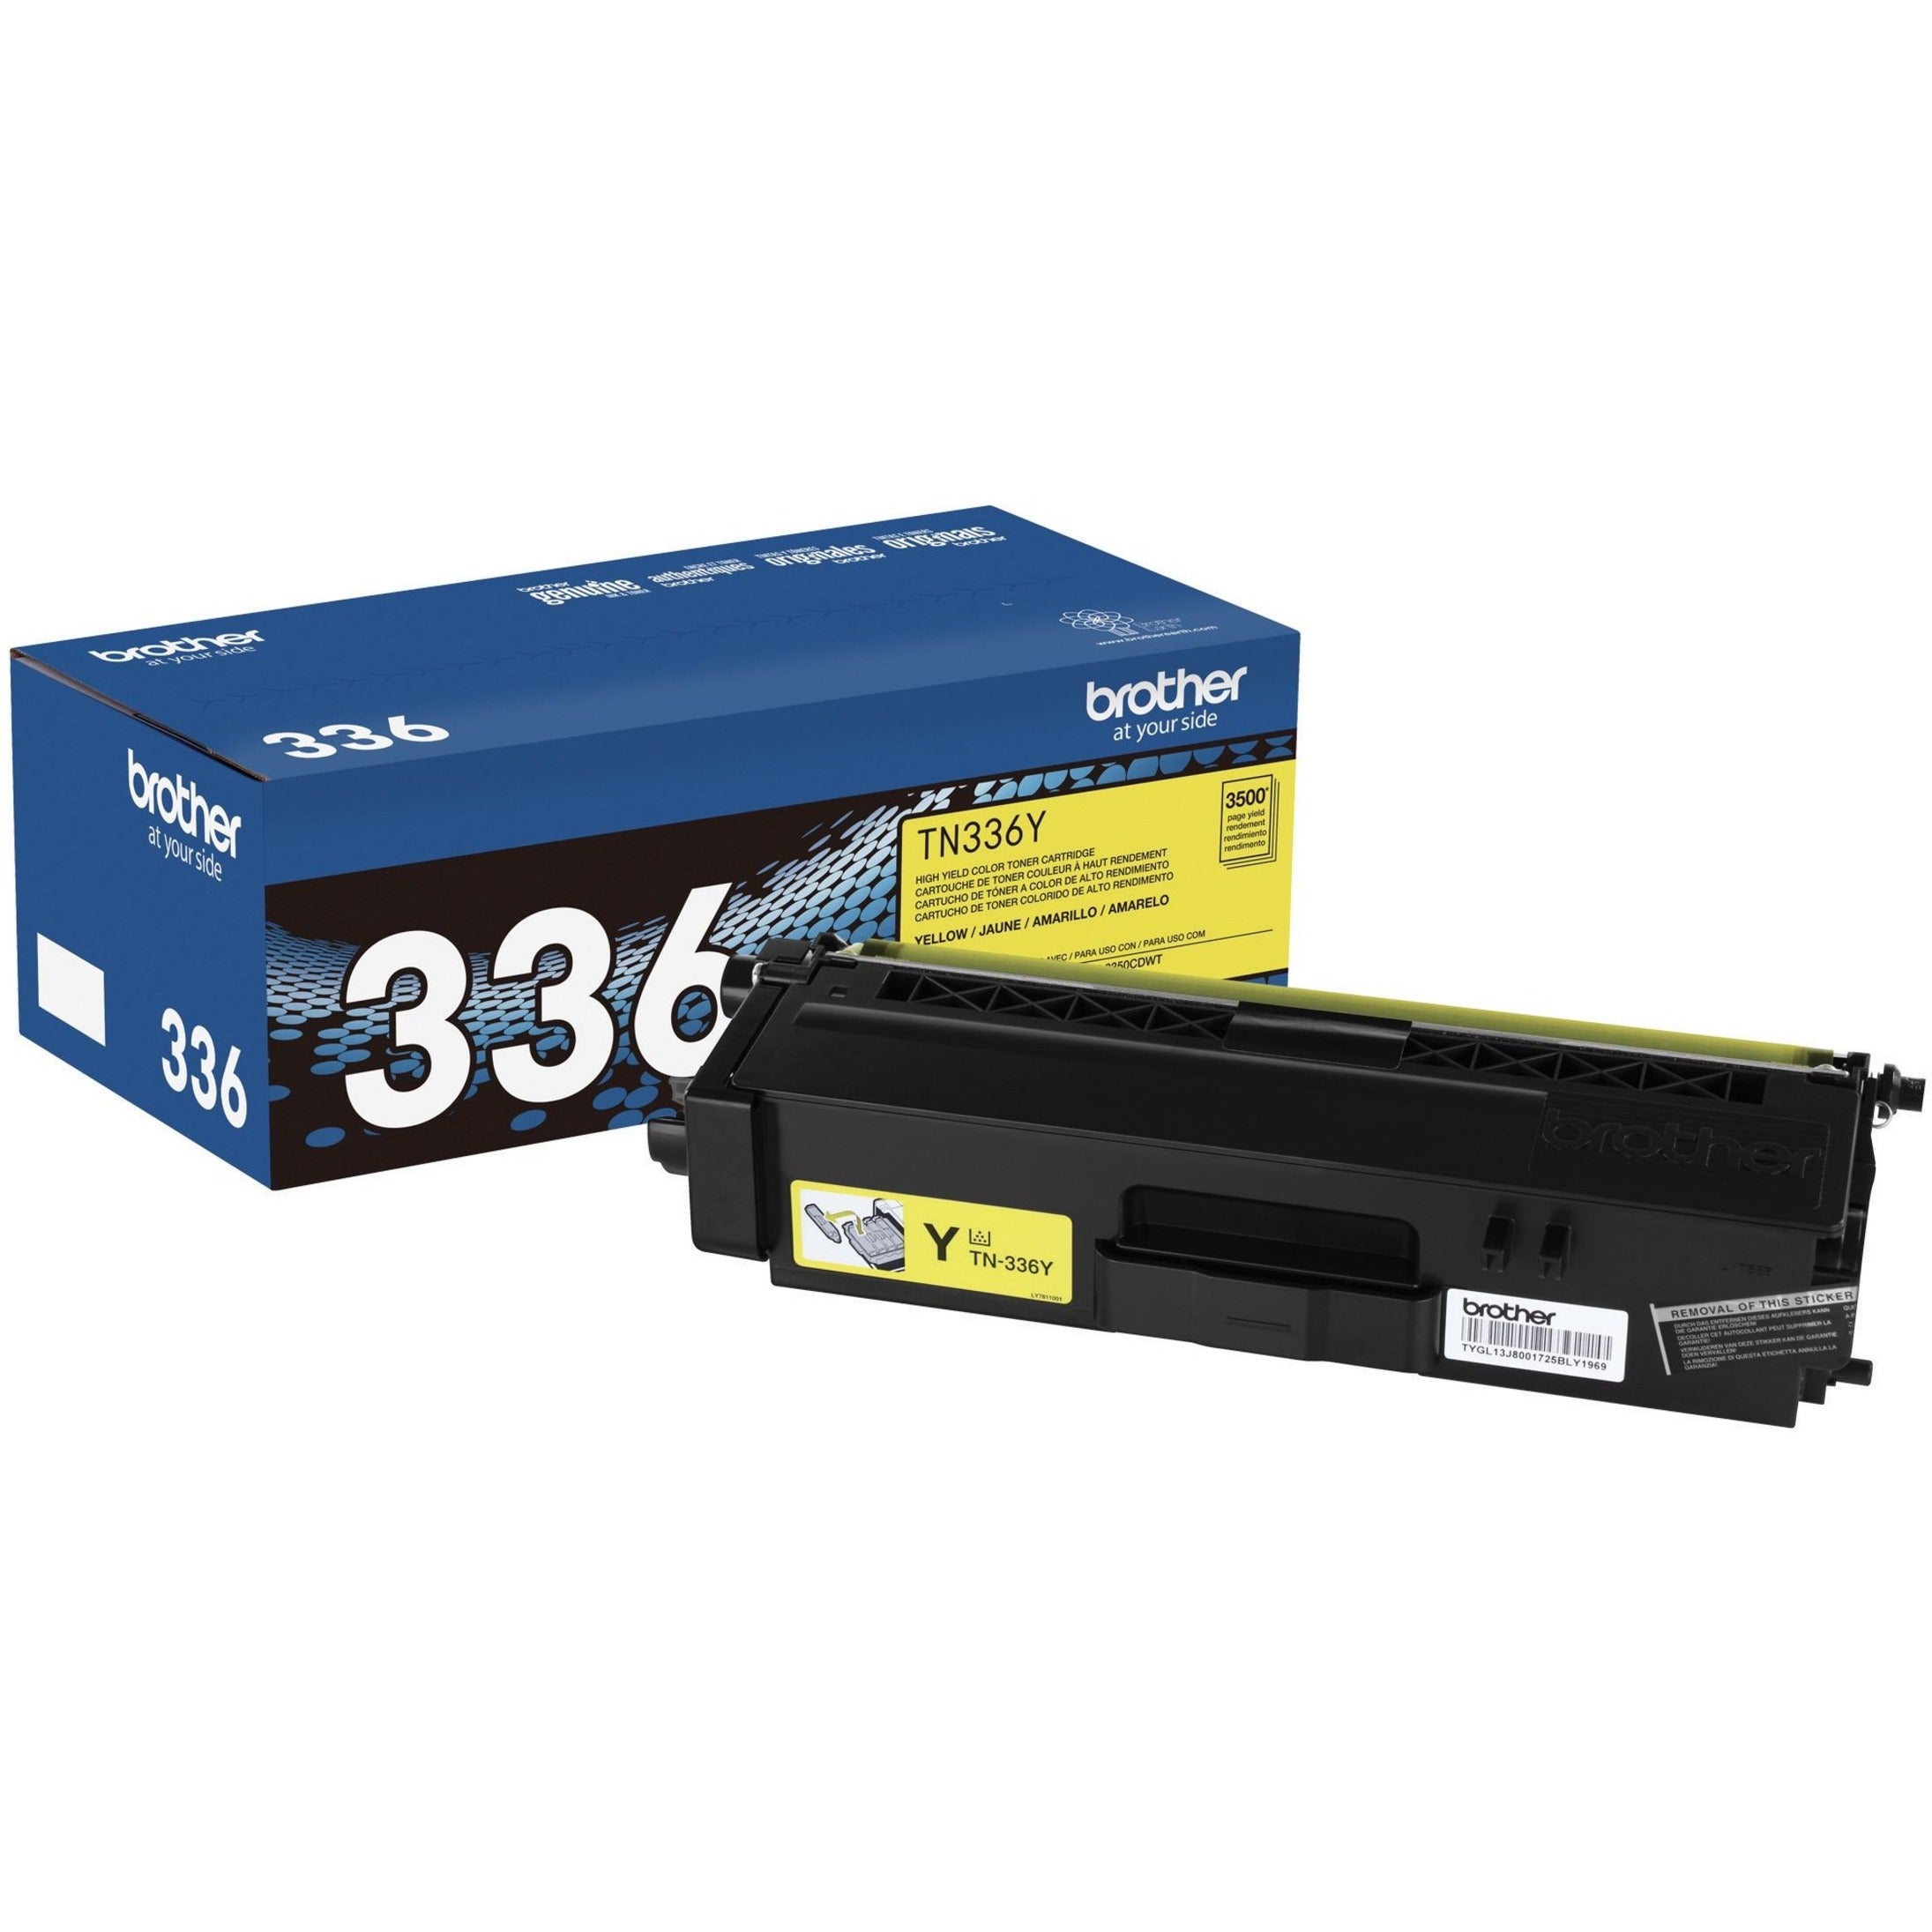 Brother TN336Y High Yield Yellow Toner Cartridge, 3500 Pages